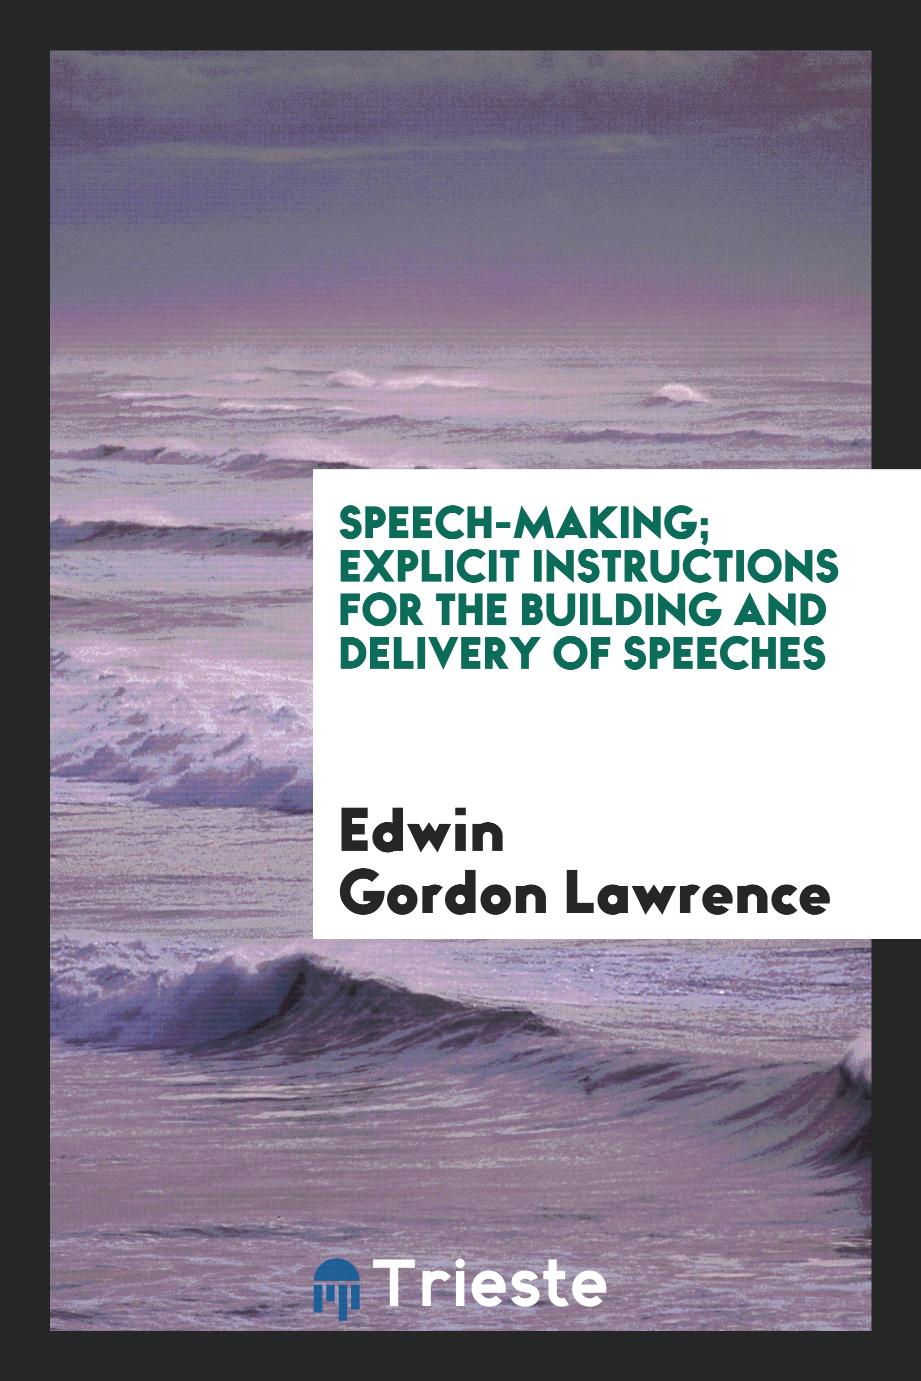 Speech-making; explicit instructions for the building and delivery of speeches